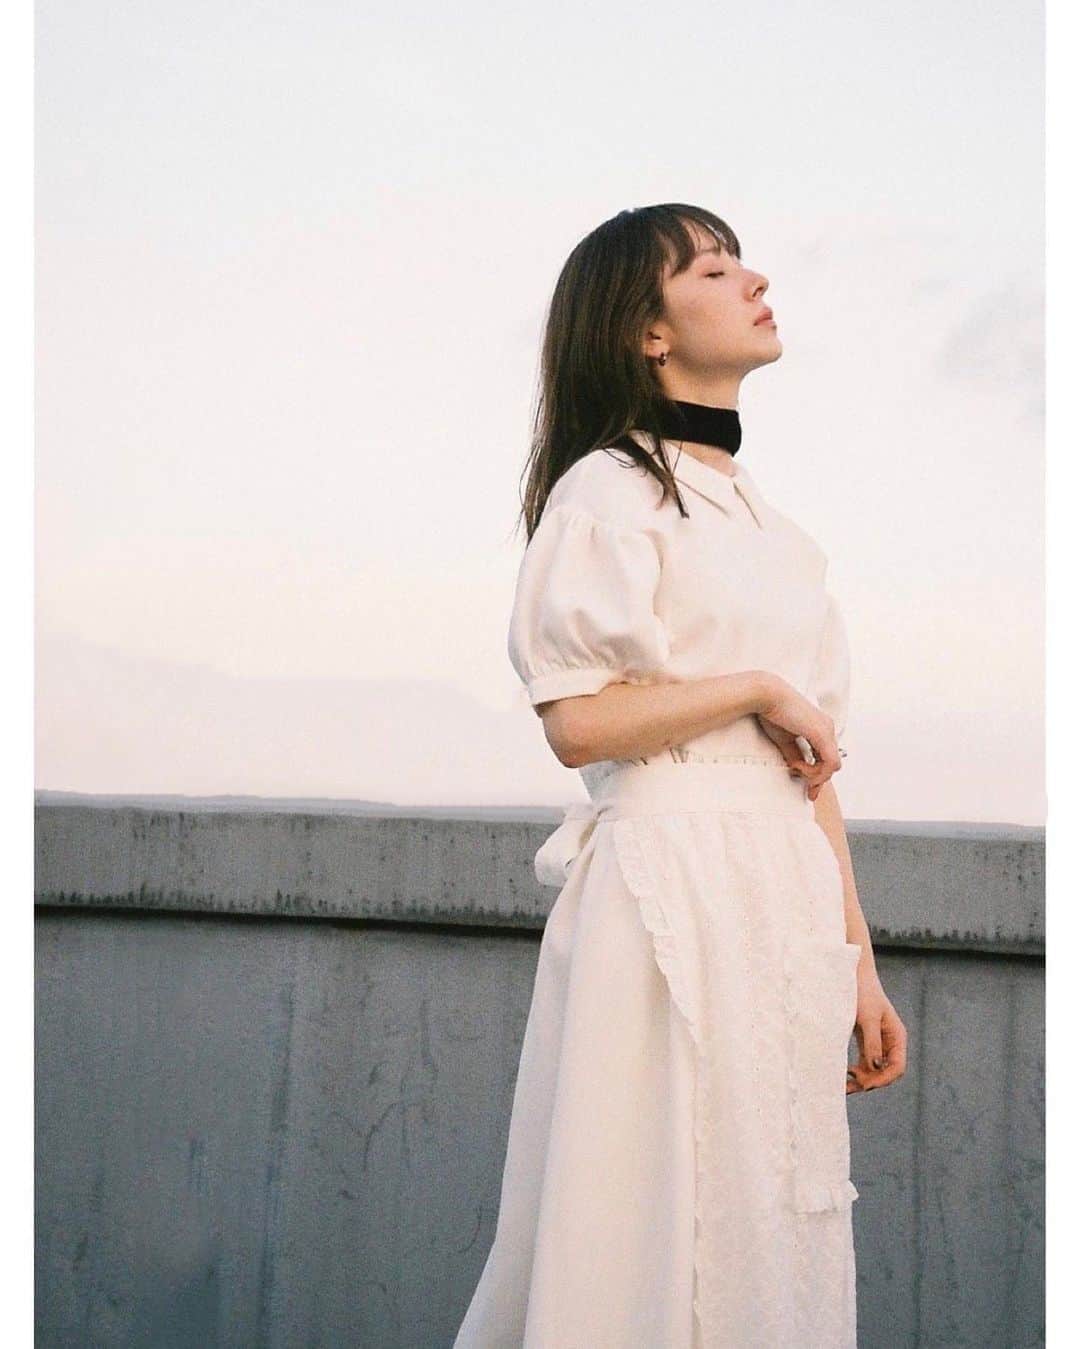 merry jennyさんのインスタグラム写真 - (merry jennyInstagram)「【　information　】 ㅤㅤㅤㅤㅤㅤㅤㅤㅤㅤㅤㅤㅤ 8/29 (sat) ルミネ池袋店 OPEN ! = shop twitter & LINE start = ㅤㅤㅤㅤㅤㅤㅤㅤㅤㅤㅤㅤㅤ ご来店お待ちしております♡ ㅤㅤㅤㅤㅤㅤㅤㅤㅤㅤㅤㅤㅤ limited 8.29-31 ● 人気 item special price ● shop LINE友達追加 ￥1,000 OFF ticket present ! ㅤㅤㅤㅤㅤㅤㅤㅤㅤㅤㅤㅤㅤ limited item ◌ spangle apron one-piece ◌ クロシェウッドハンドBAG (purple) ㅤㅤㅤㅤㅤㅤㅤㅤㅤㅤㅤㅤㅤ novelty over ￥18,700 (tax in)  floral tiered pochette ㅤㅤㅤㅤㅤㅤㅤㅤㅤㅤㅤㅤㅤ ㅤㅤㅤㅤㅤㅤㅤㅤㅤㅤㅤㅤㅤ merry jenny ルミネ池袋店 4Fㅤㅤㅤㅤㅤㅤㅤㅤㅤ 東京都豊島区西池袋1-11-1 ㅤㅤㅤㅤㅤㅤㅤㅤㅤㅤㅤㅤㅤ ㅤㅤㅤㅤㅤㅤㅤㅤㅤㅤㅤㅤㅤ #merryjenny #メリージェニー #2020aw #autumn #surrealism」8月22日 11時44分 - merryjenny_instagram